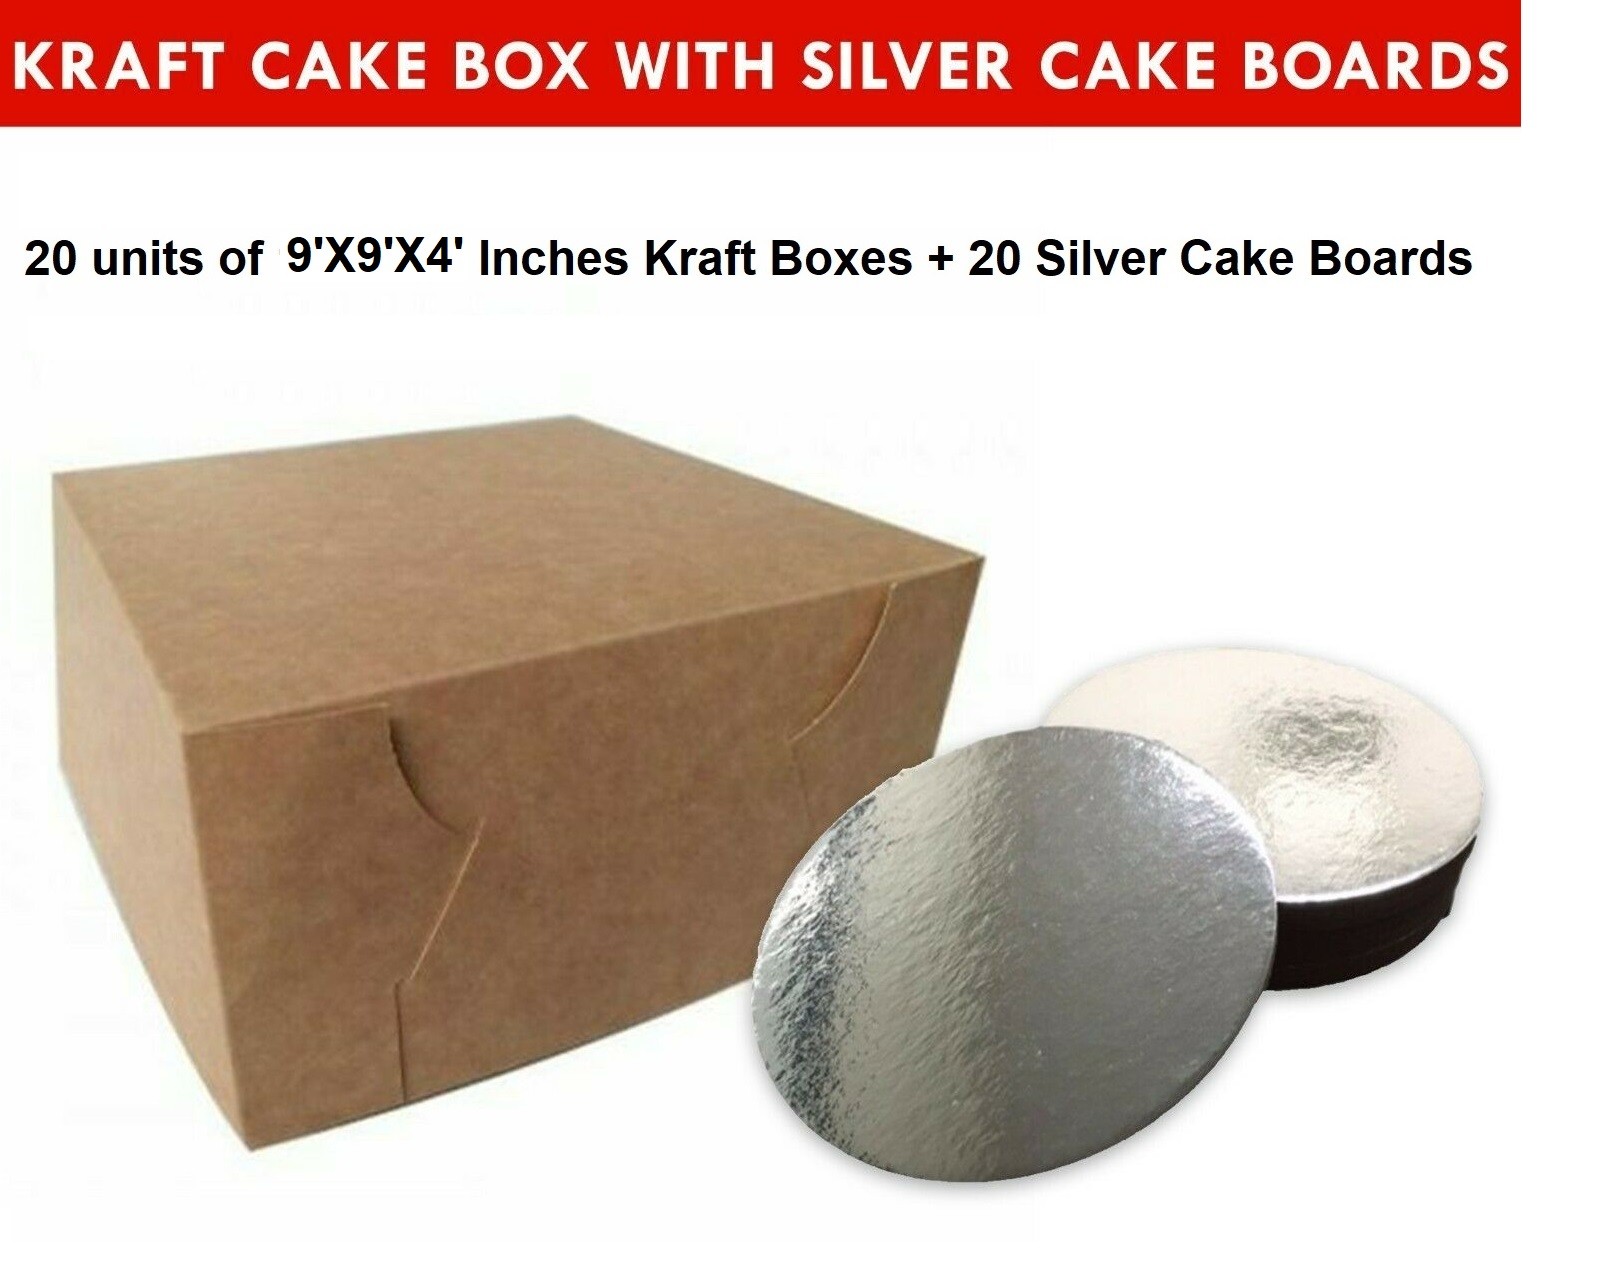 Kraft Cake Boxes with Round boards - 9" x 9" x 4" ($3.7 /pc x 20 units)